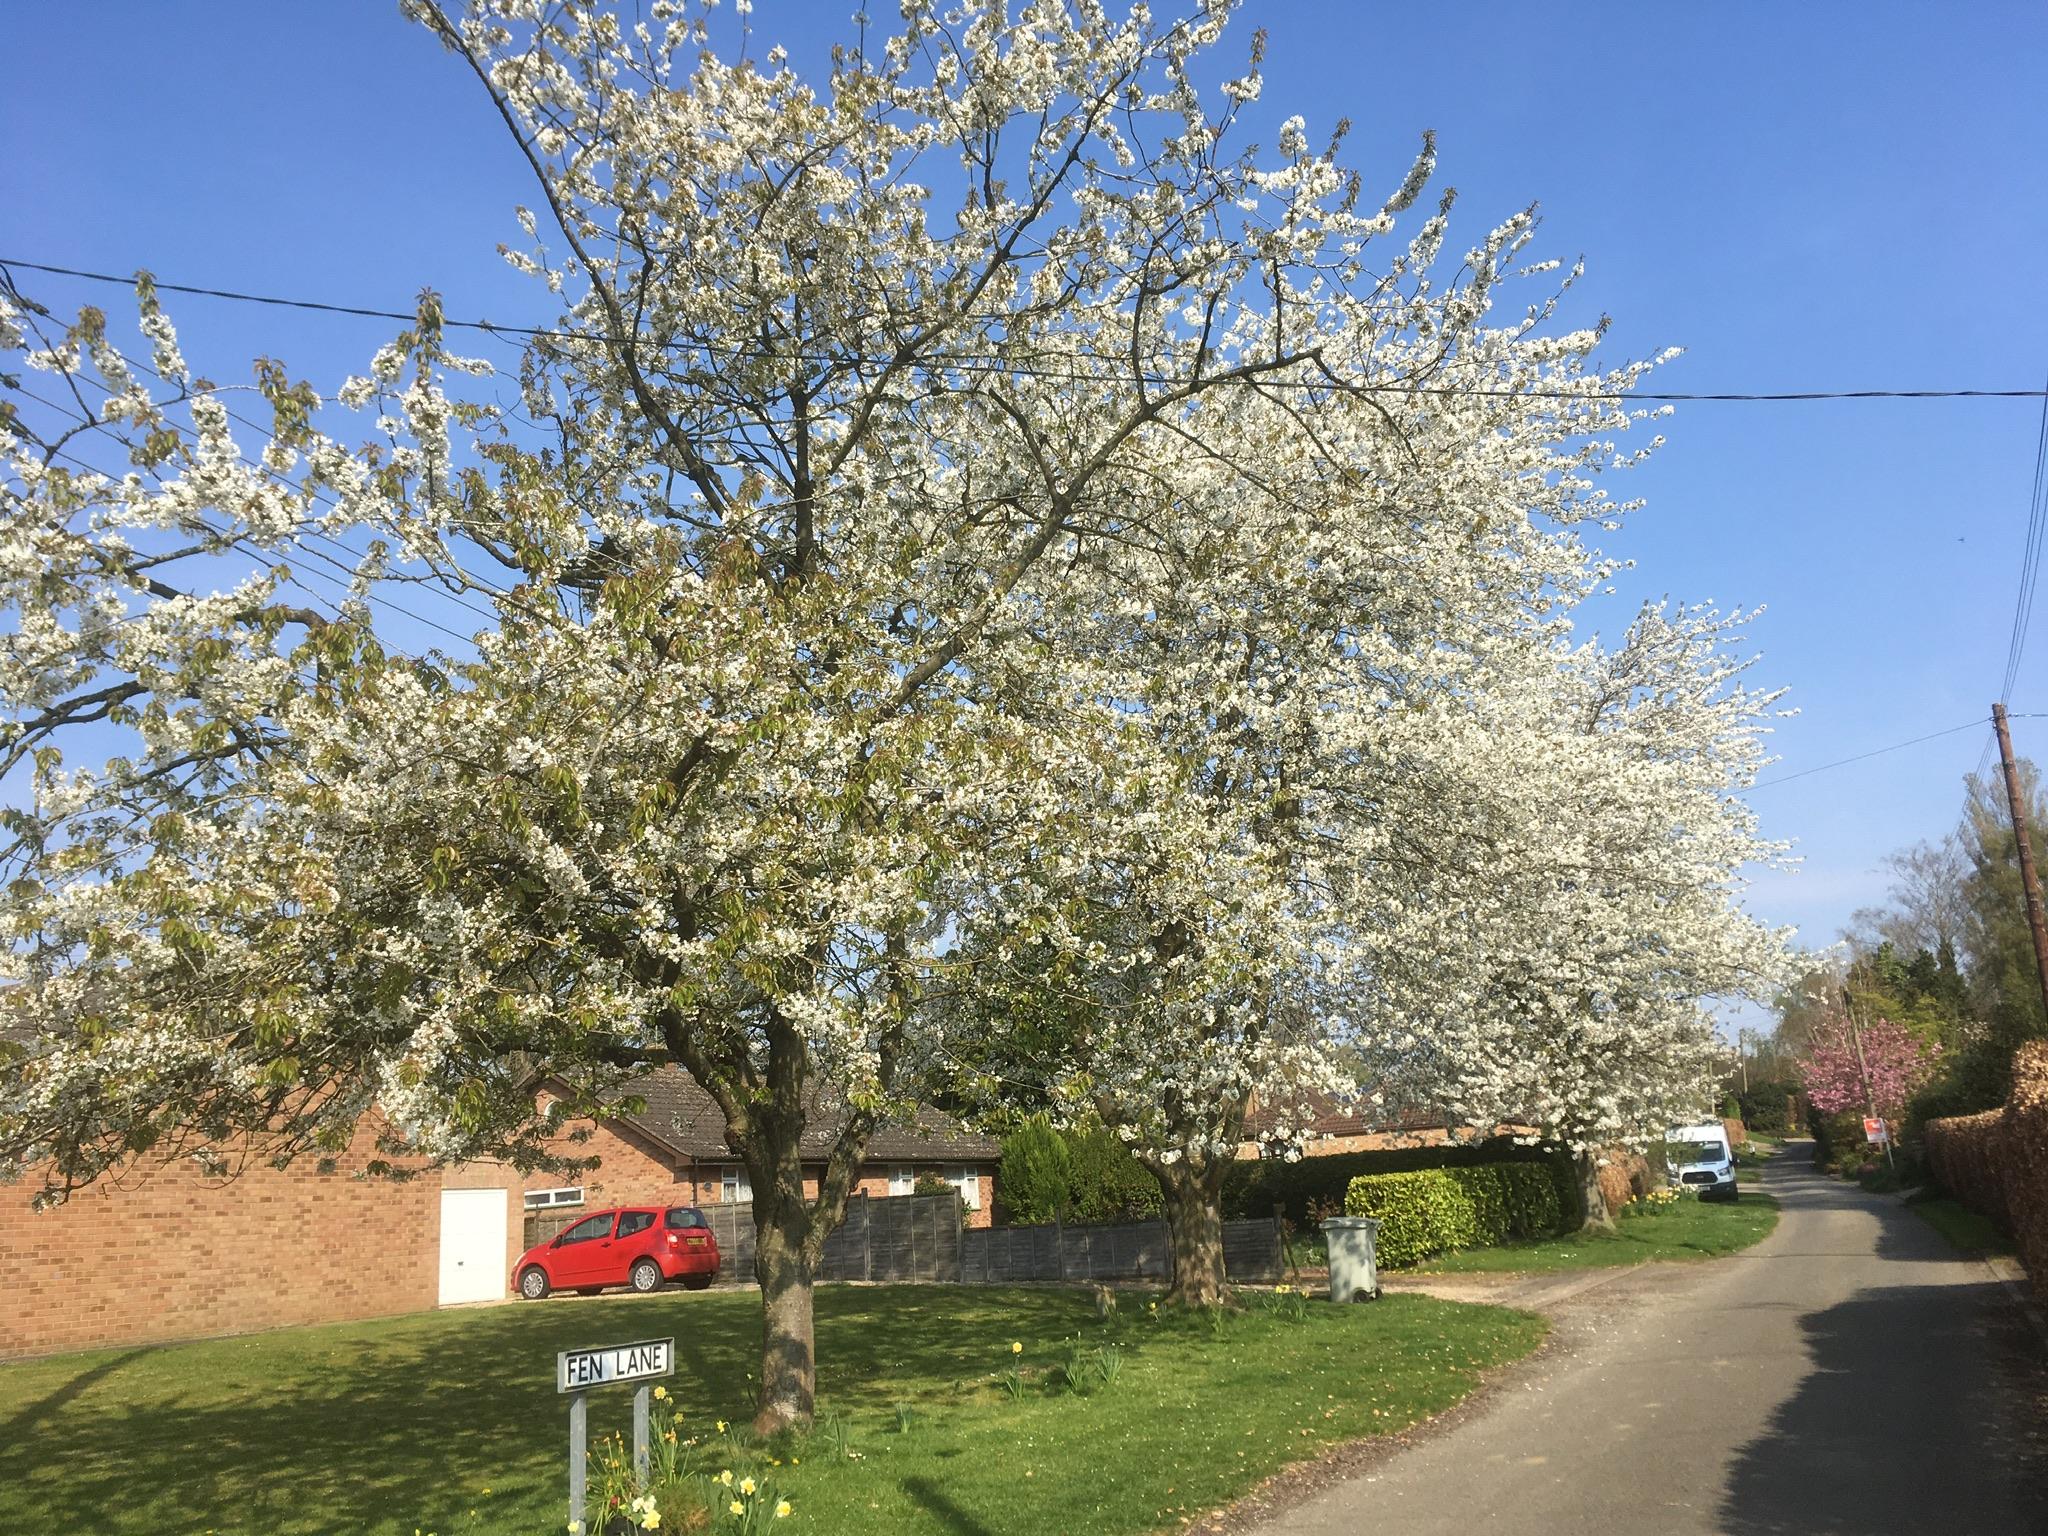 Our village has lots of lovely trees